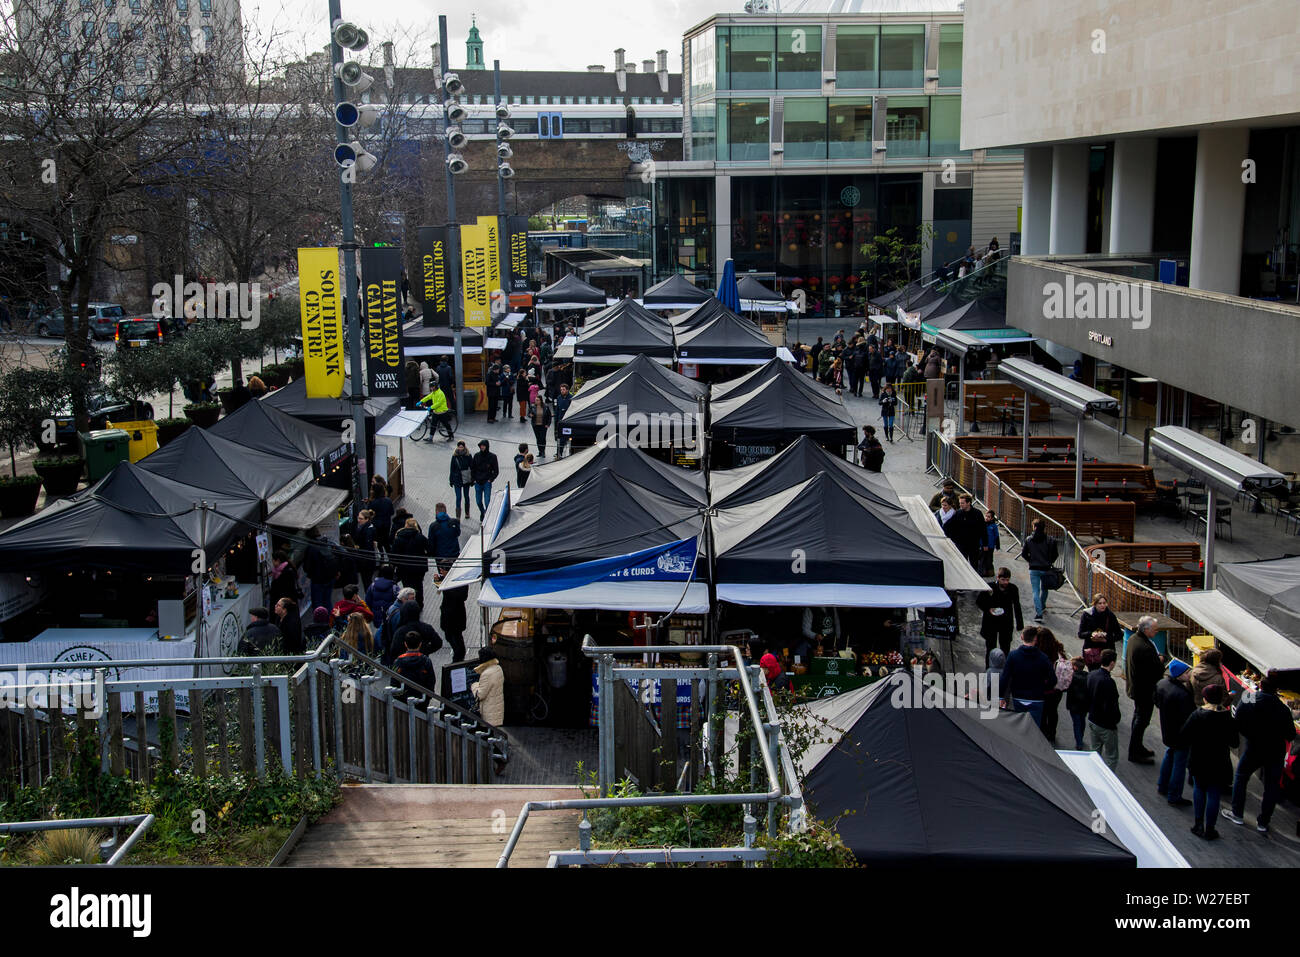 Overlooking the market plaza outside the Royal Festival Hall on the south bank of the Thames in London 2019 Stock Photo